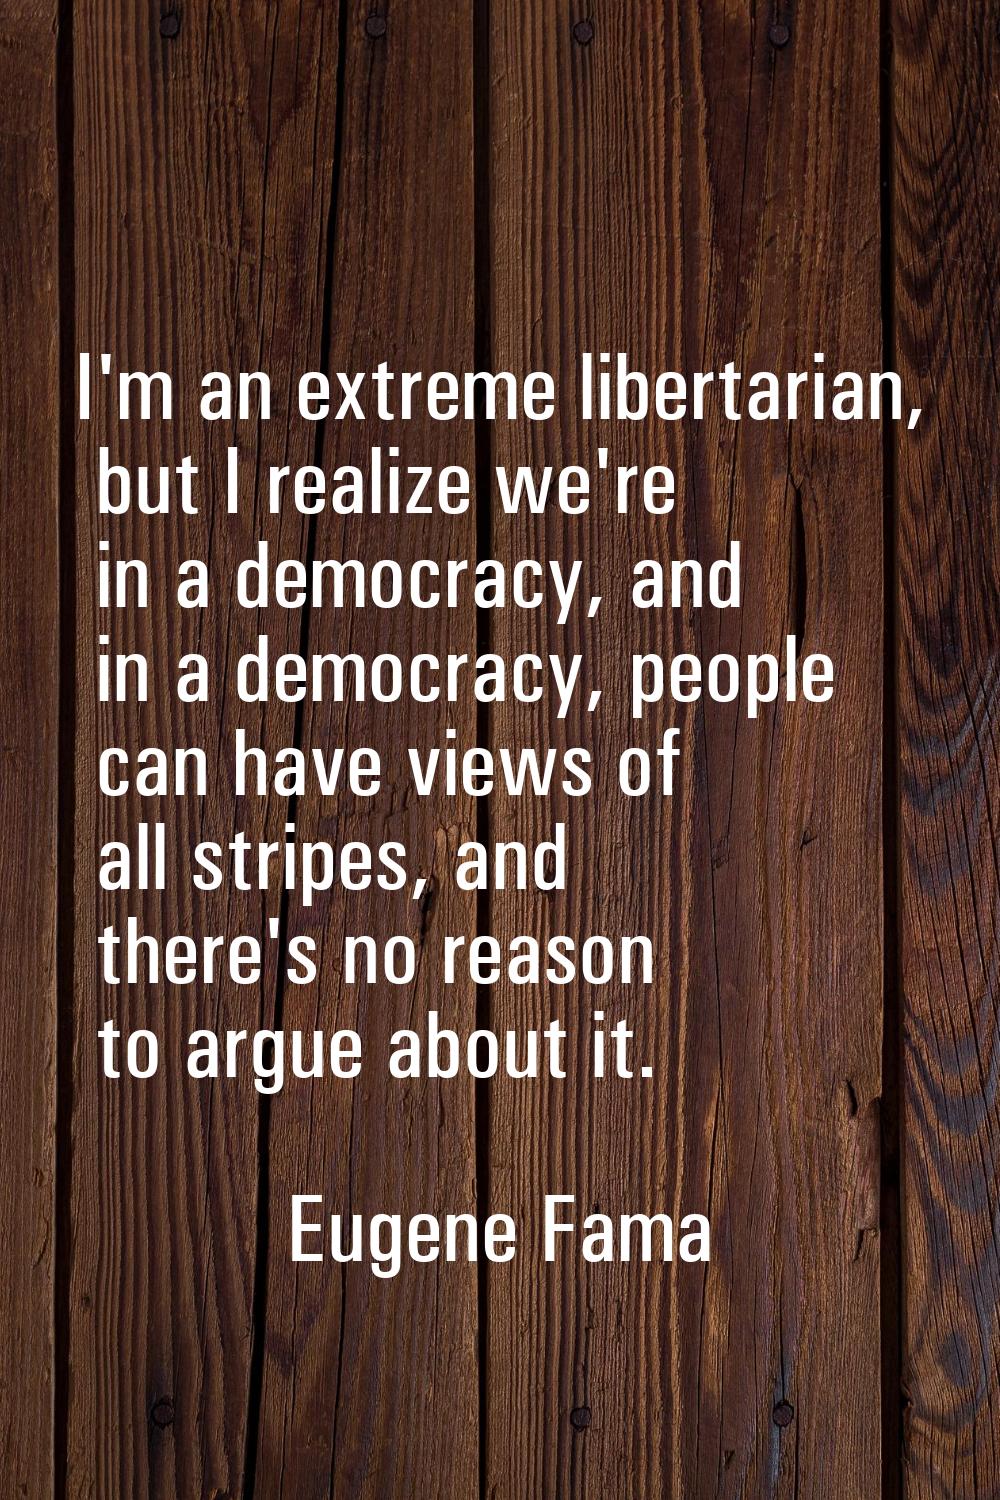 I'm an extreme libertarian, but I realize we're in a democracy, and in a democracy, people can have